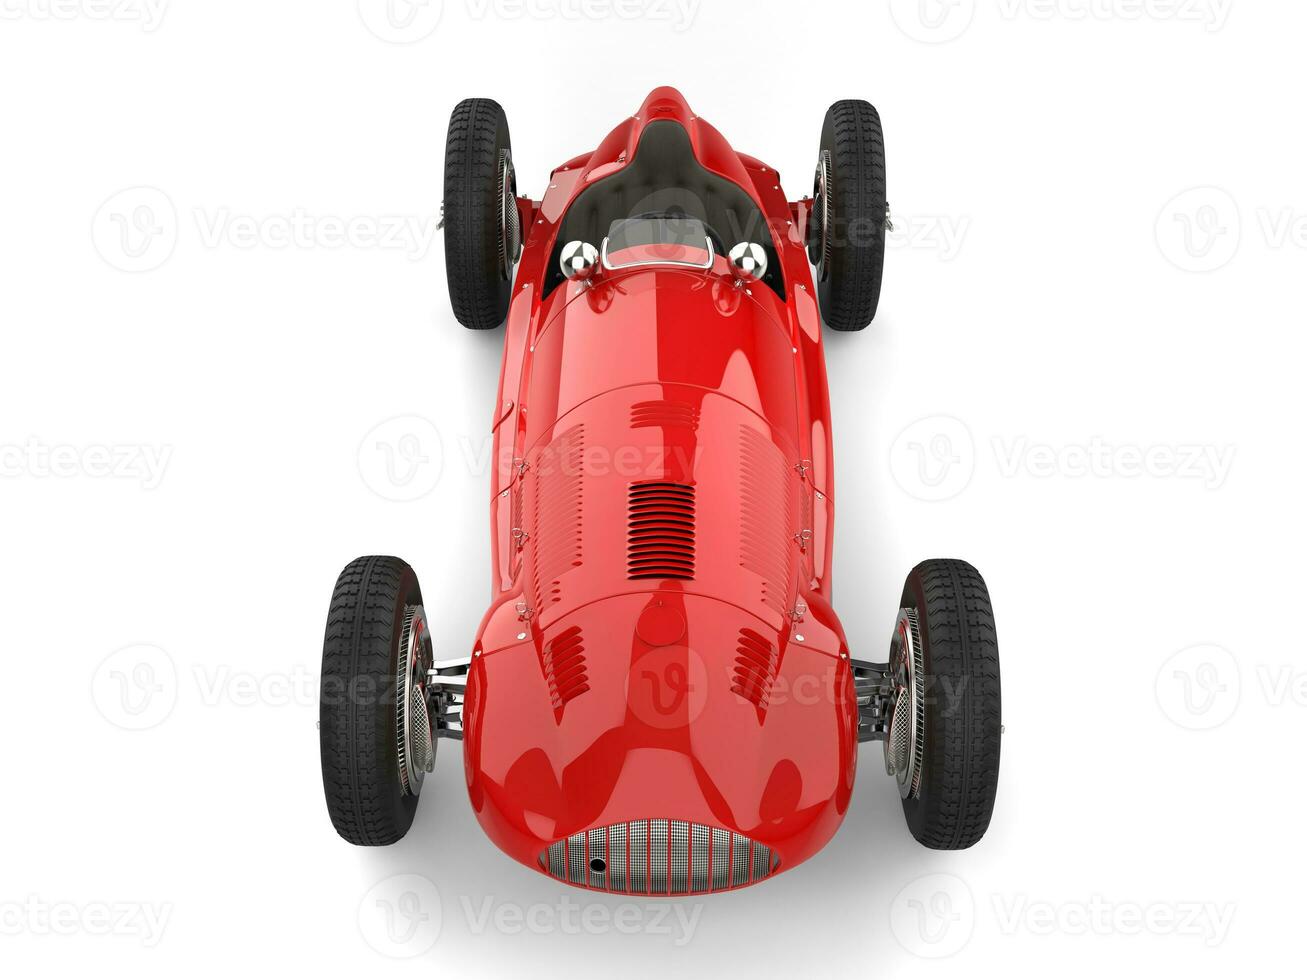 Vintage red race car restored to perfect condition - top down view photo